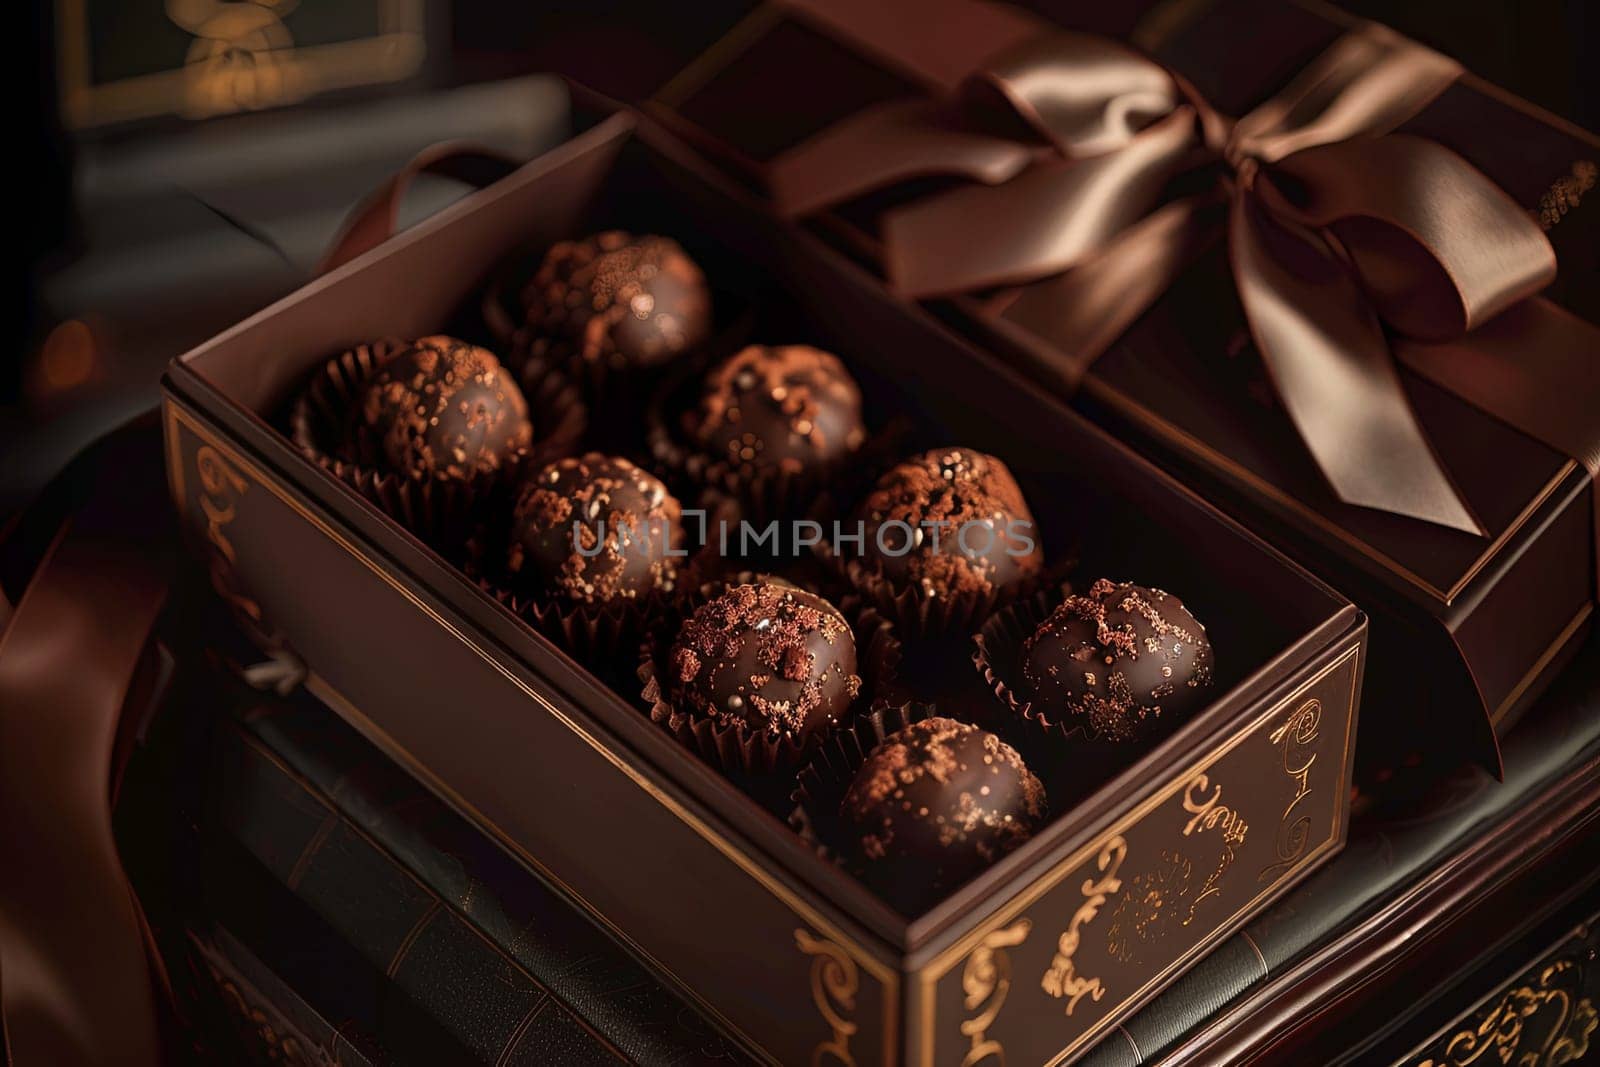 A luxurious box of chocolate truffles decorated with ribbons, sitting on a table.